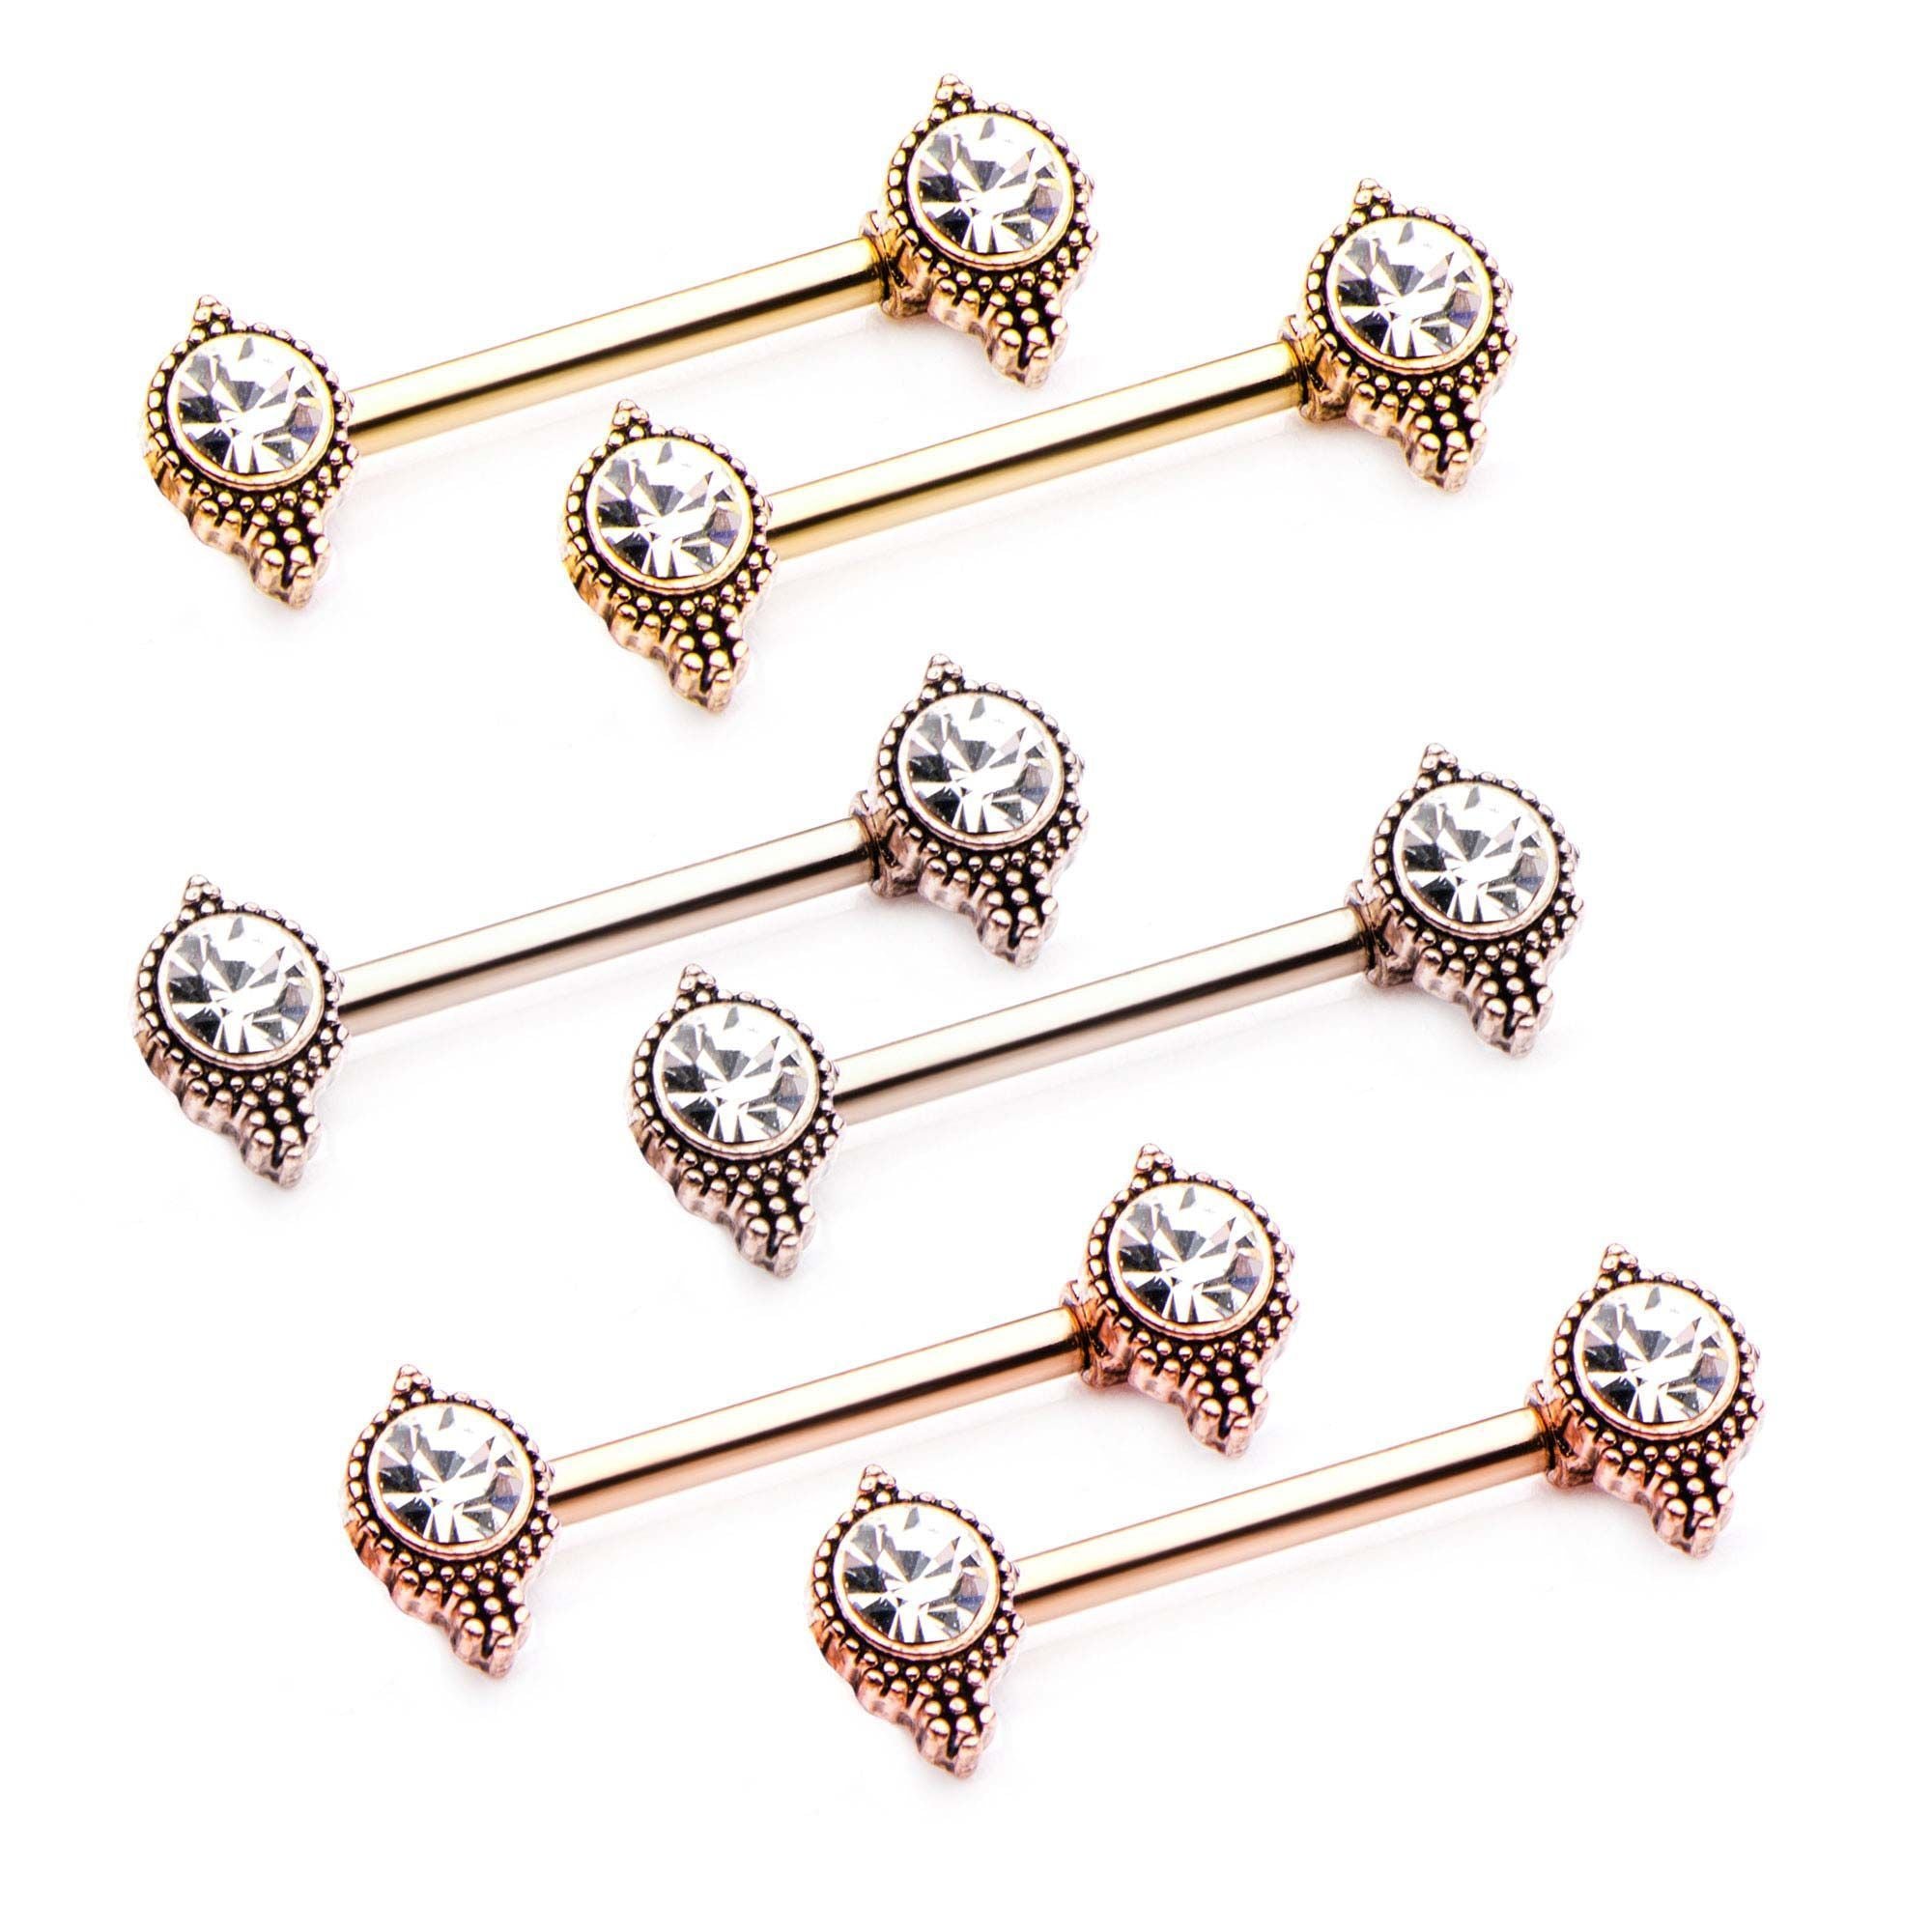 14g 9/16 Forward Facing Round Clear CZ Nipple Barbells 4.8mm round 7.7mm ends - 1 Pair sbvnp45716